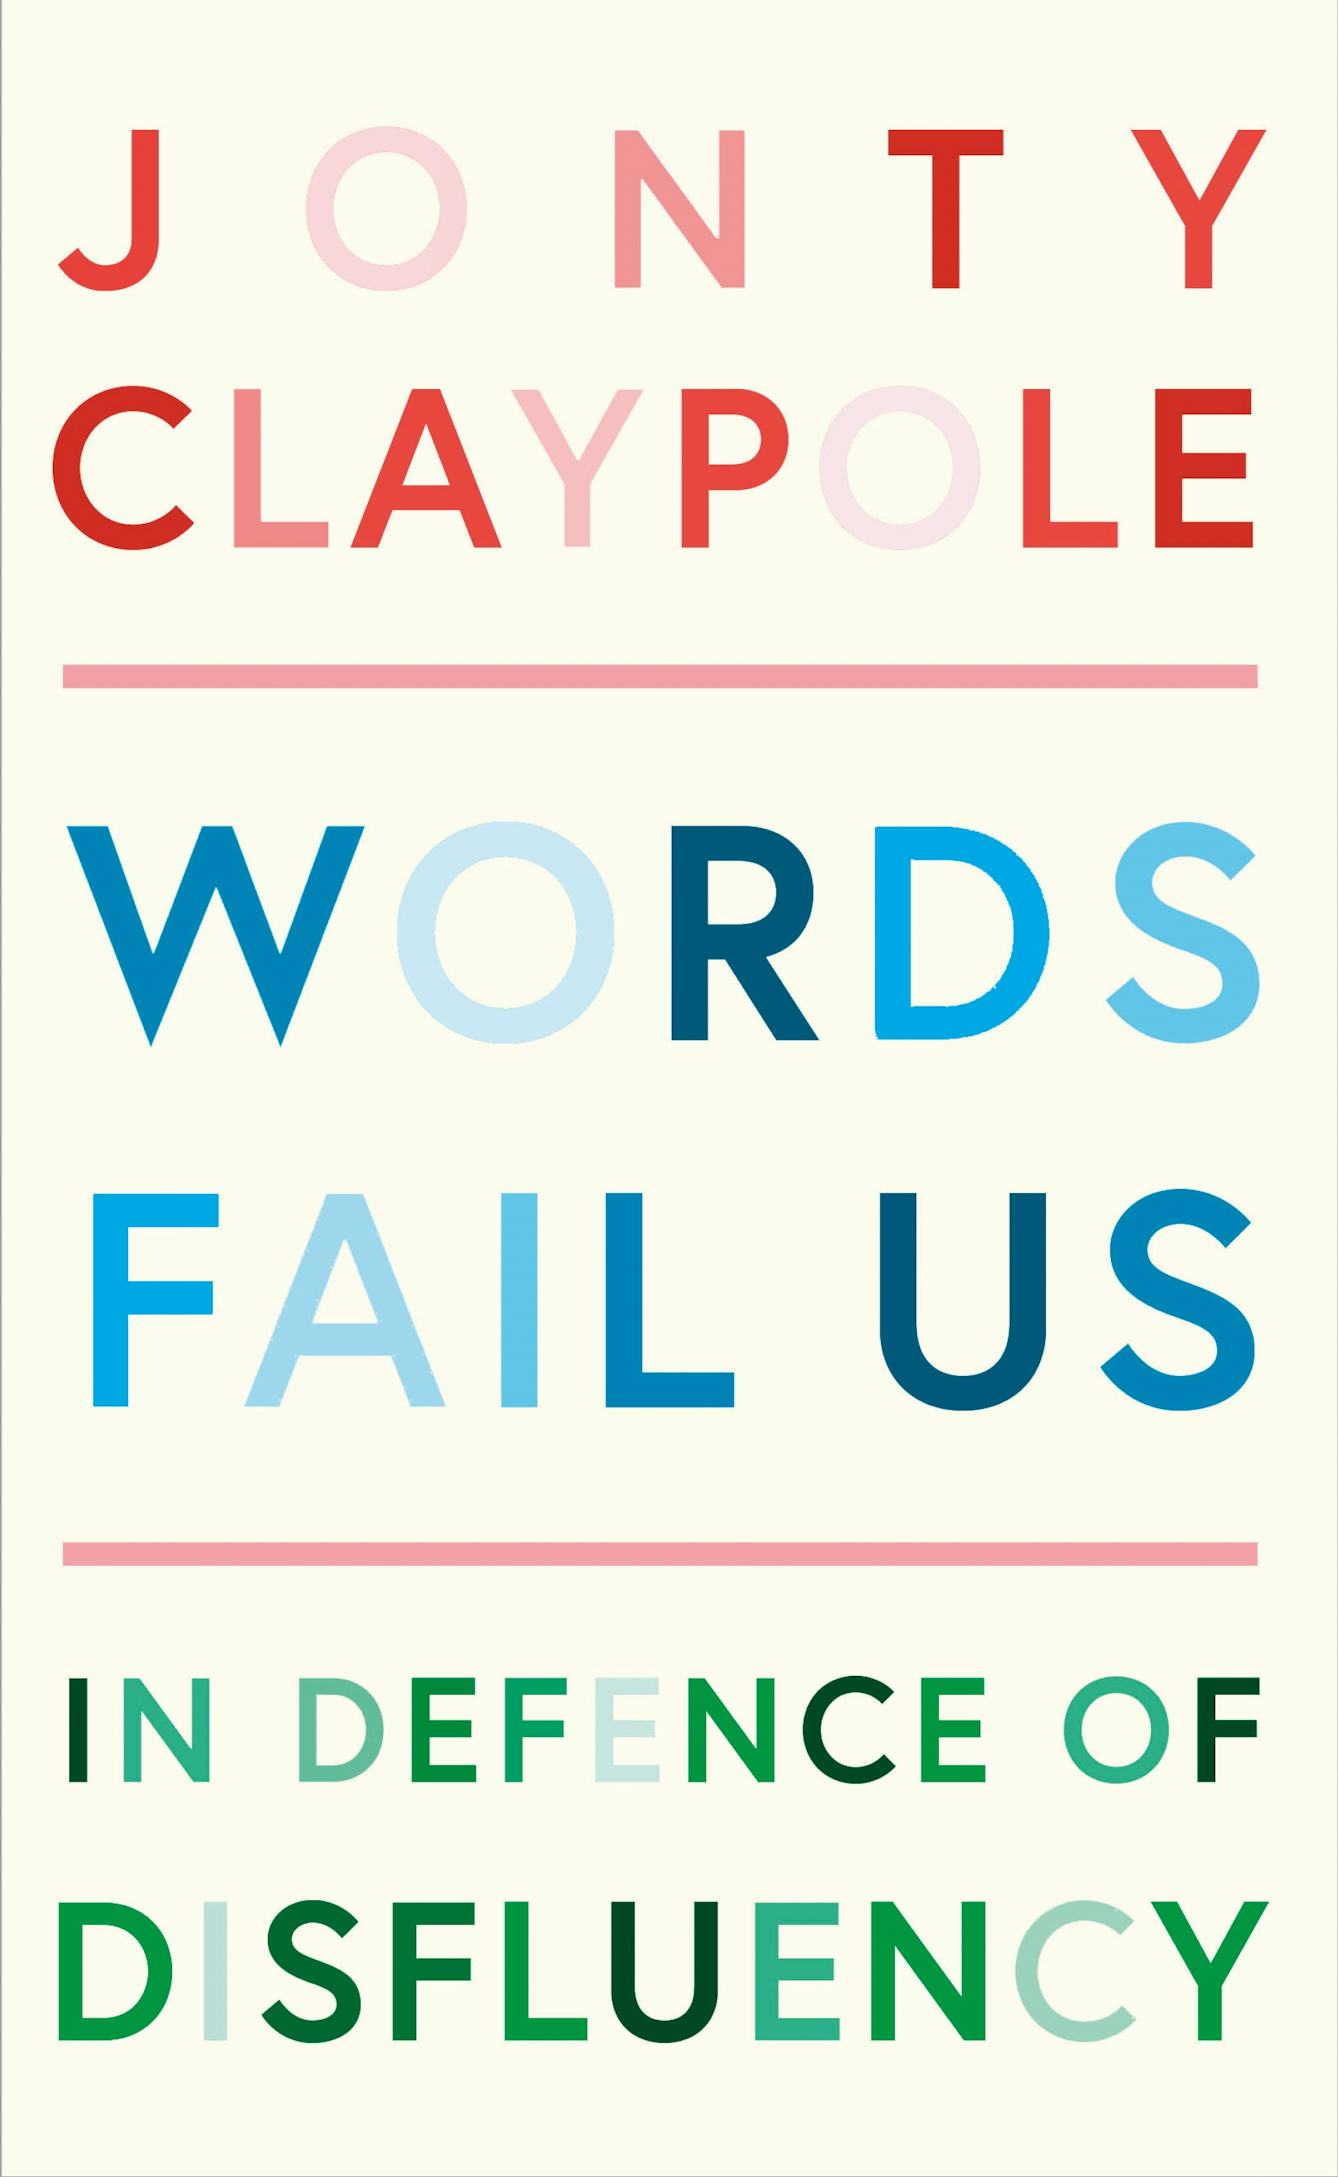 Book cover featuring a typographic design in pink, red, blue and green